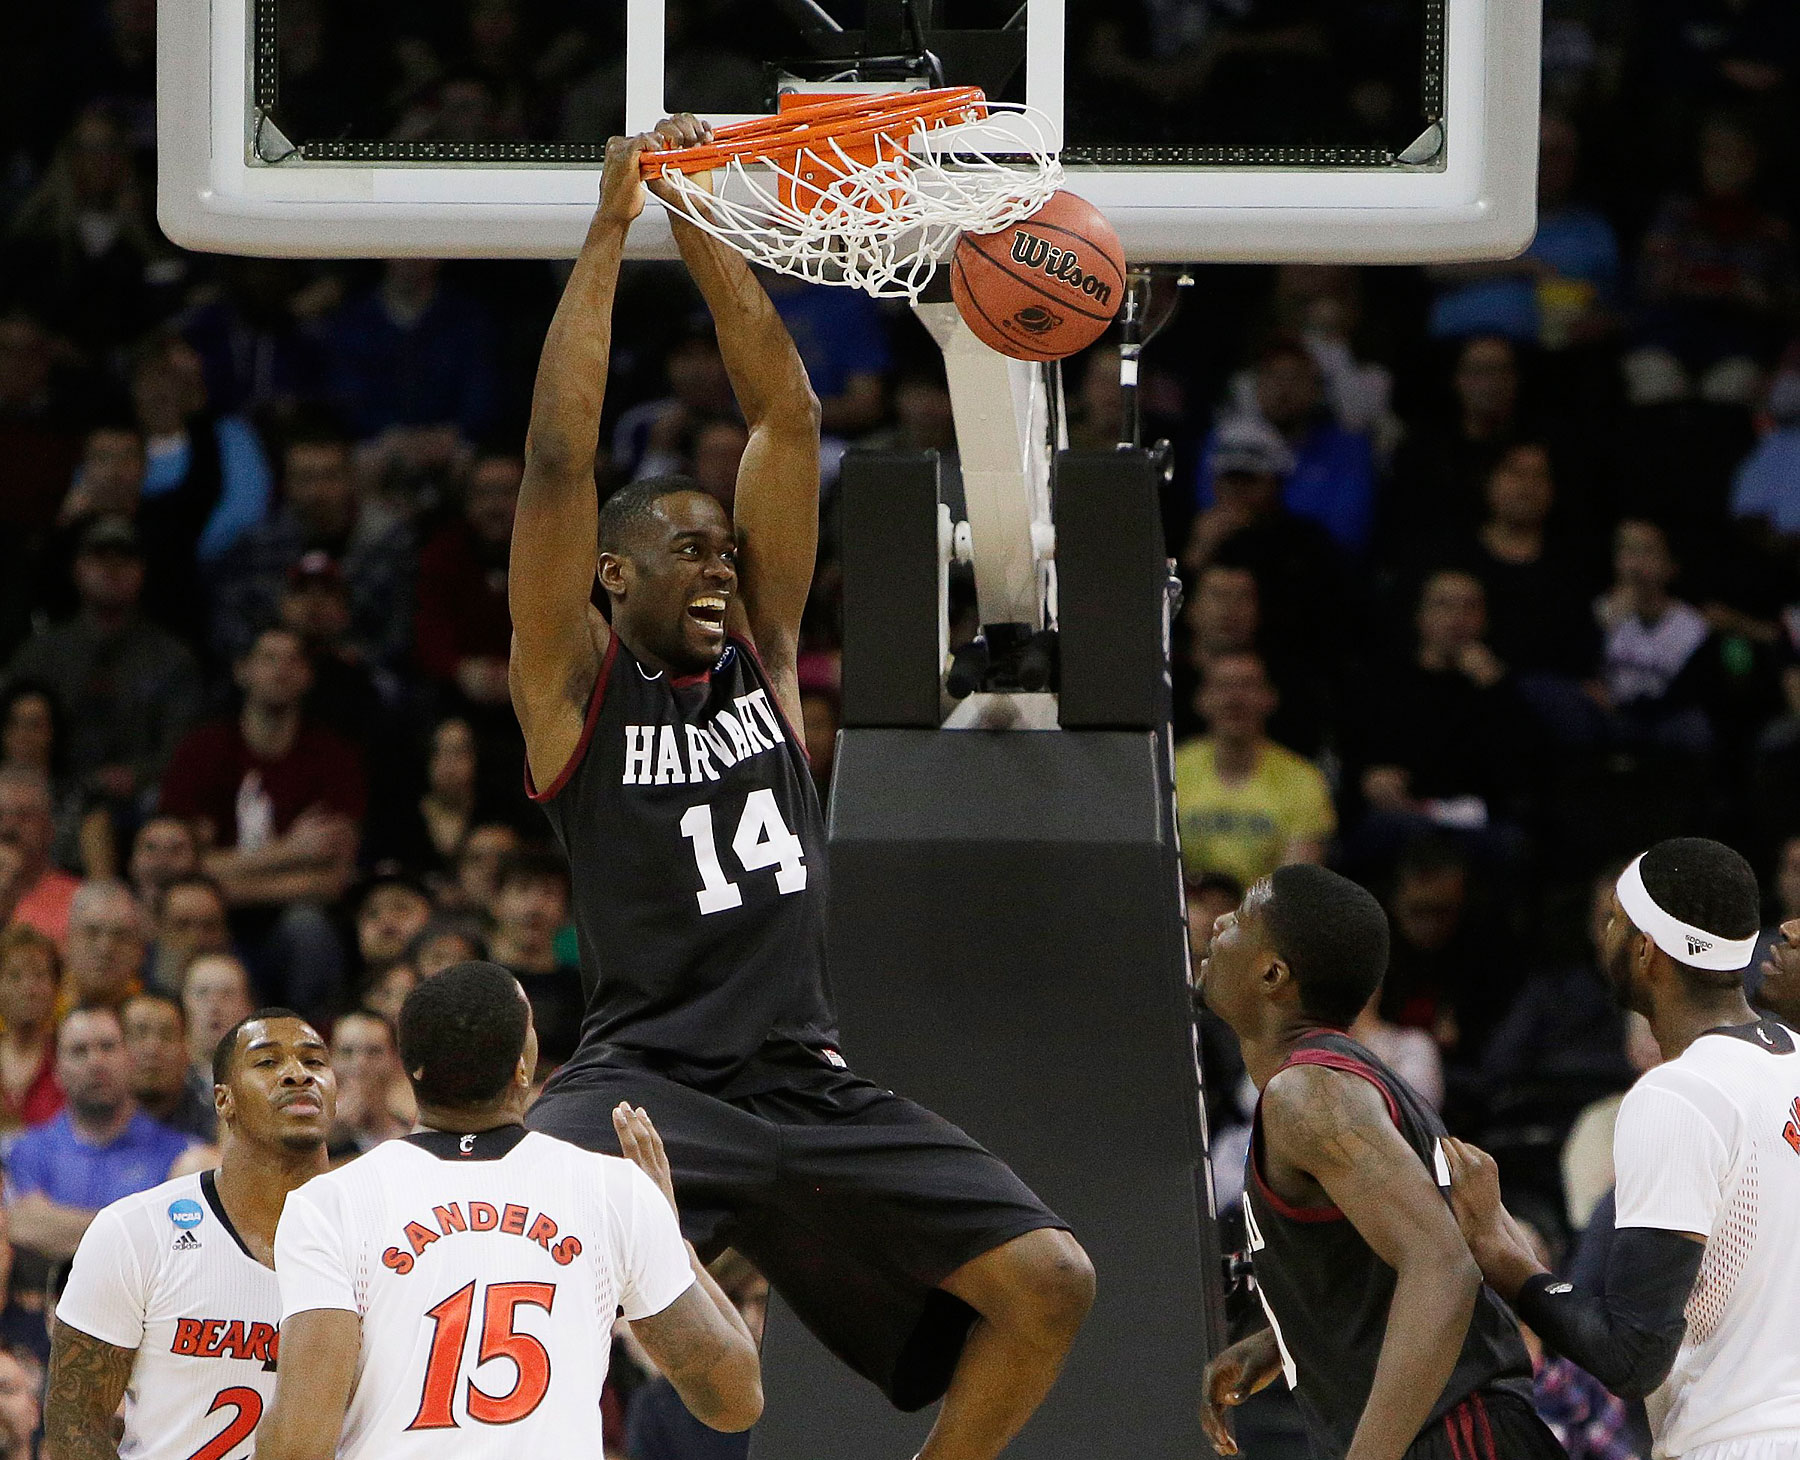 Harvardís Steve Moundou-Missi dunks against Cincinnati in the second half during the second-round of the NCAA men's college basketball tournament in Spokane, Wash., March 20, 2014. (Young Kwak&mdash;AP)